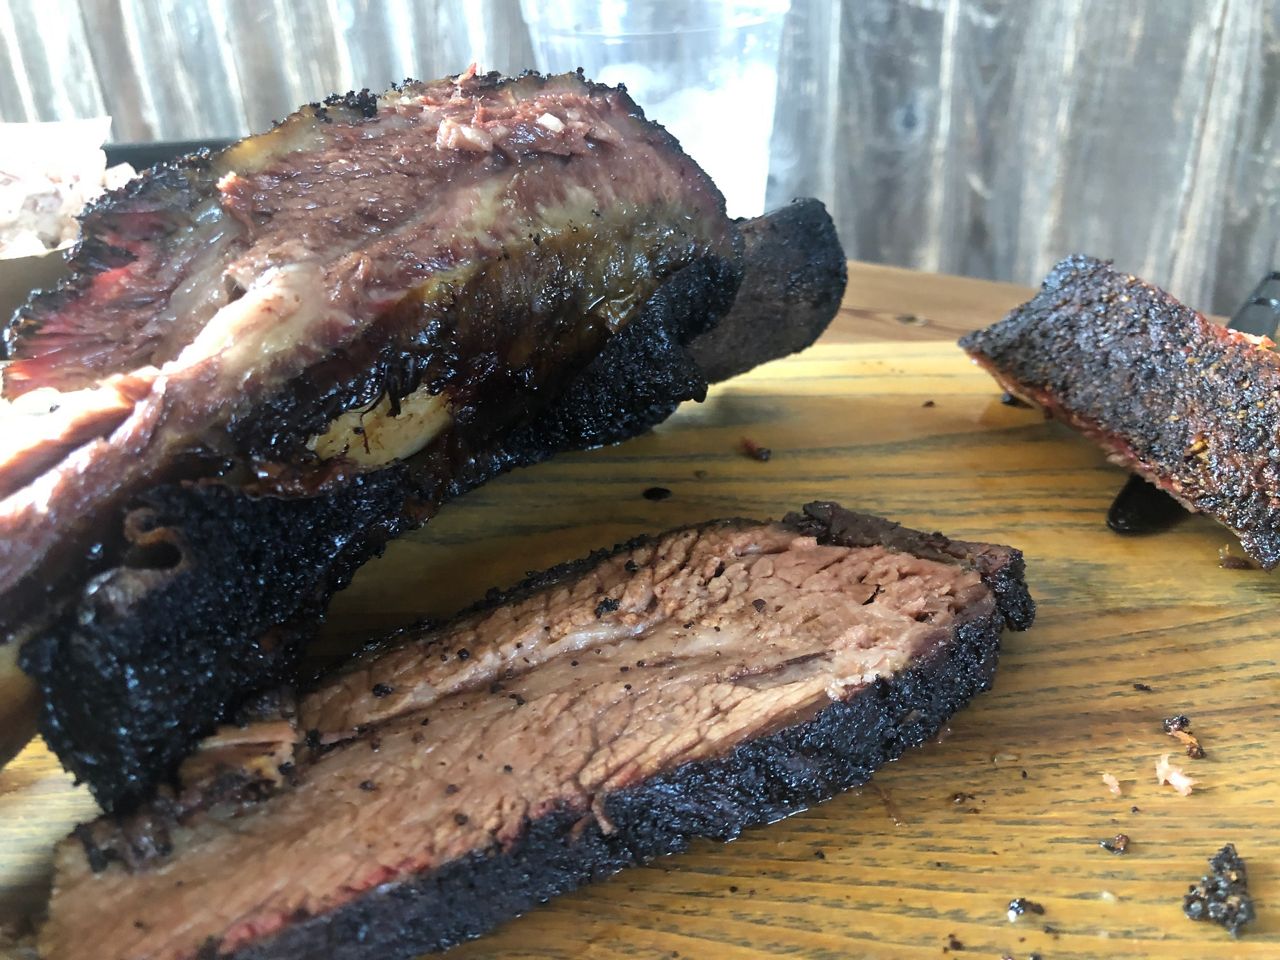 Brisket is served at Road Texas Barbecue. (Bryan Boes/Spectrum News)